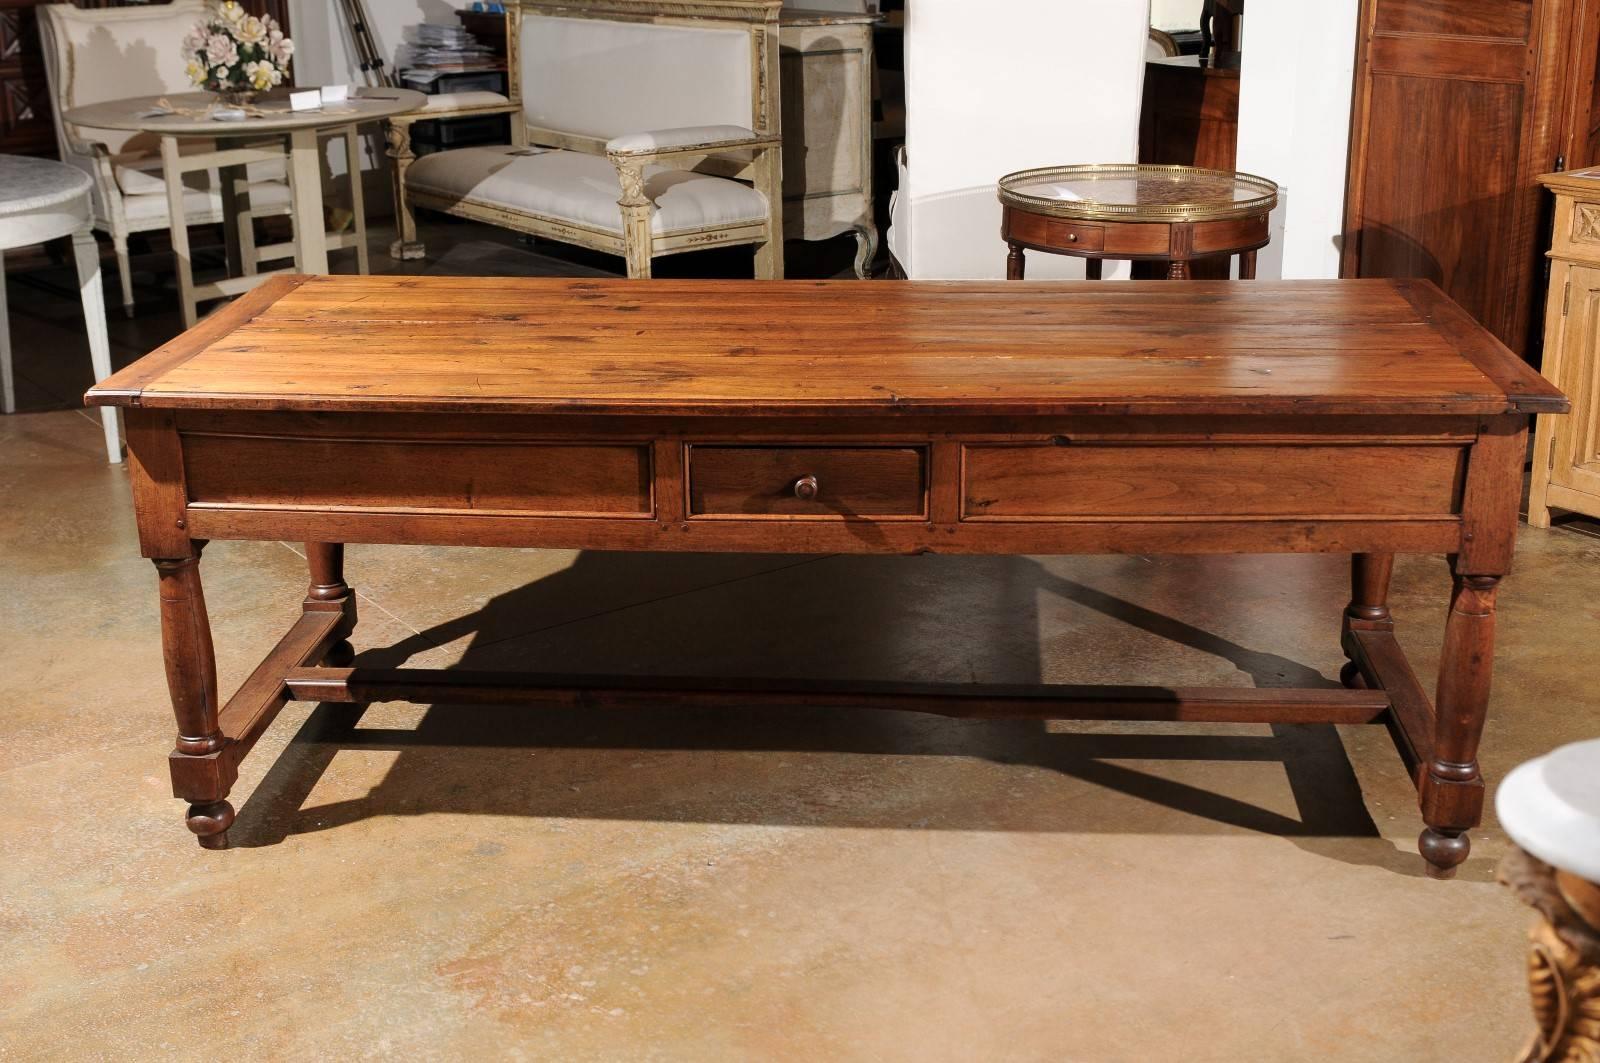 Late 18th Century French Walnut and Acacia Wood Sofa Table with Turned Legs For Sale 6